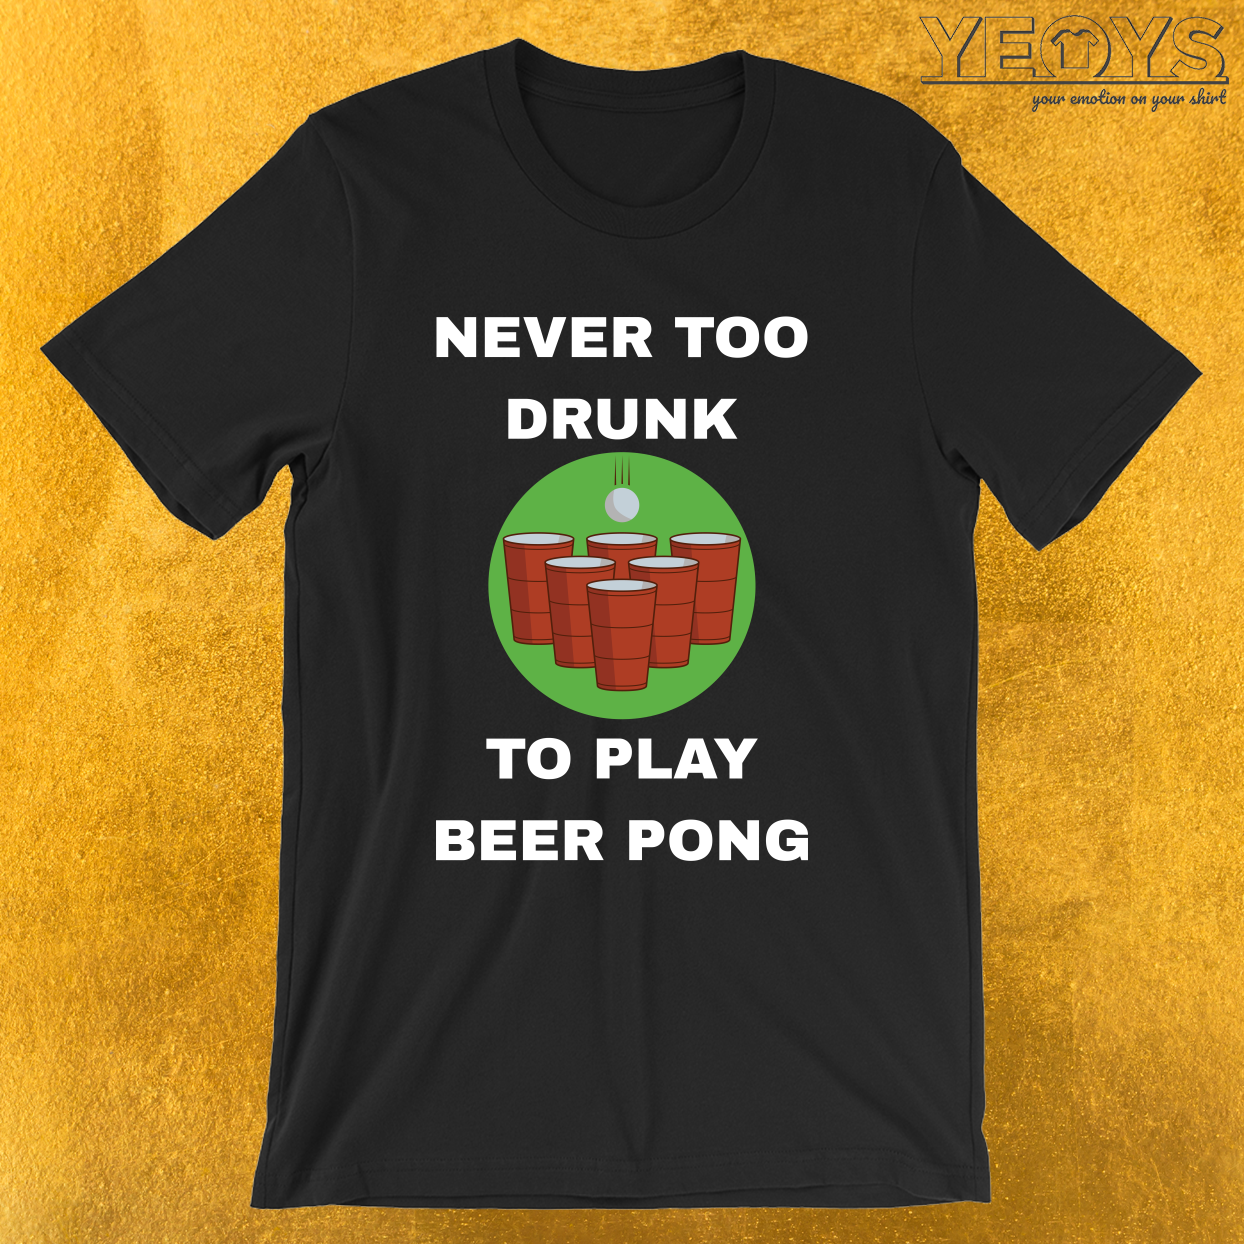 Never Too Drunk To Play Beer Pong – Funny Beer Pong Tee